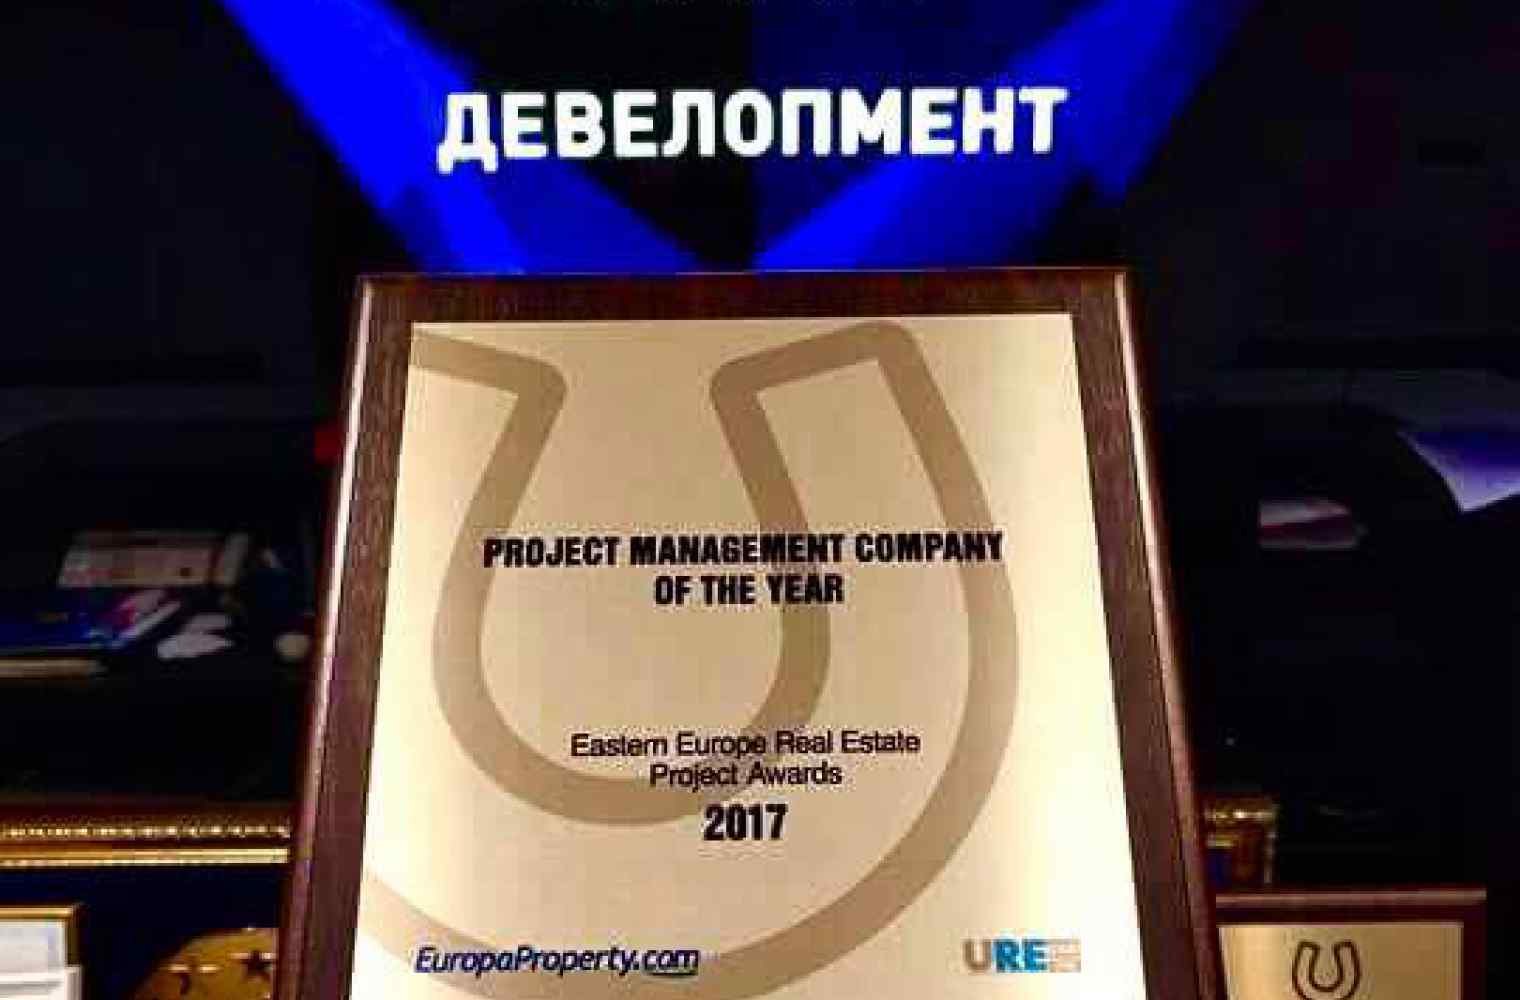 KAN Development is recognized as the best company of the year by the EEA Real Estate Forum & Project Awards